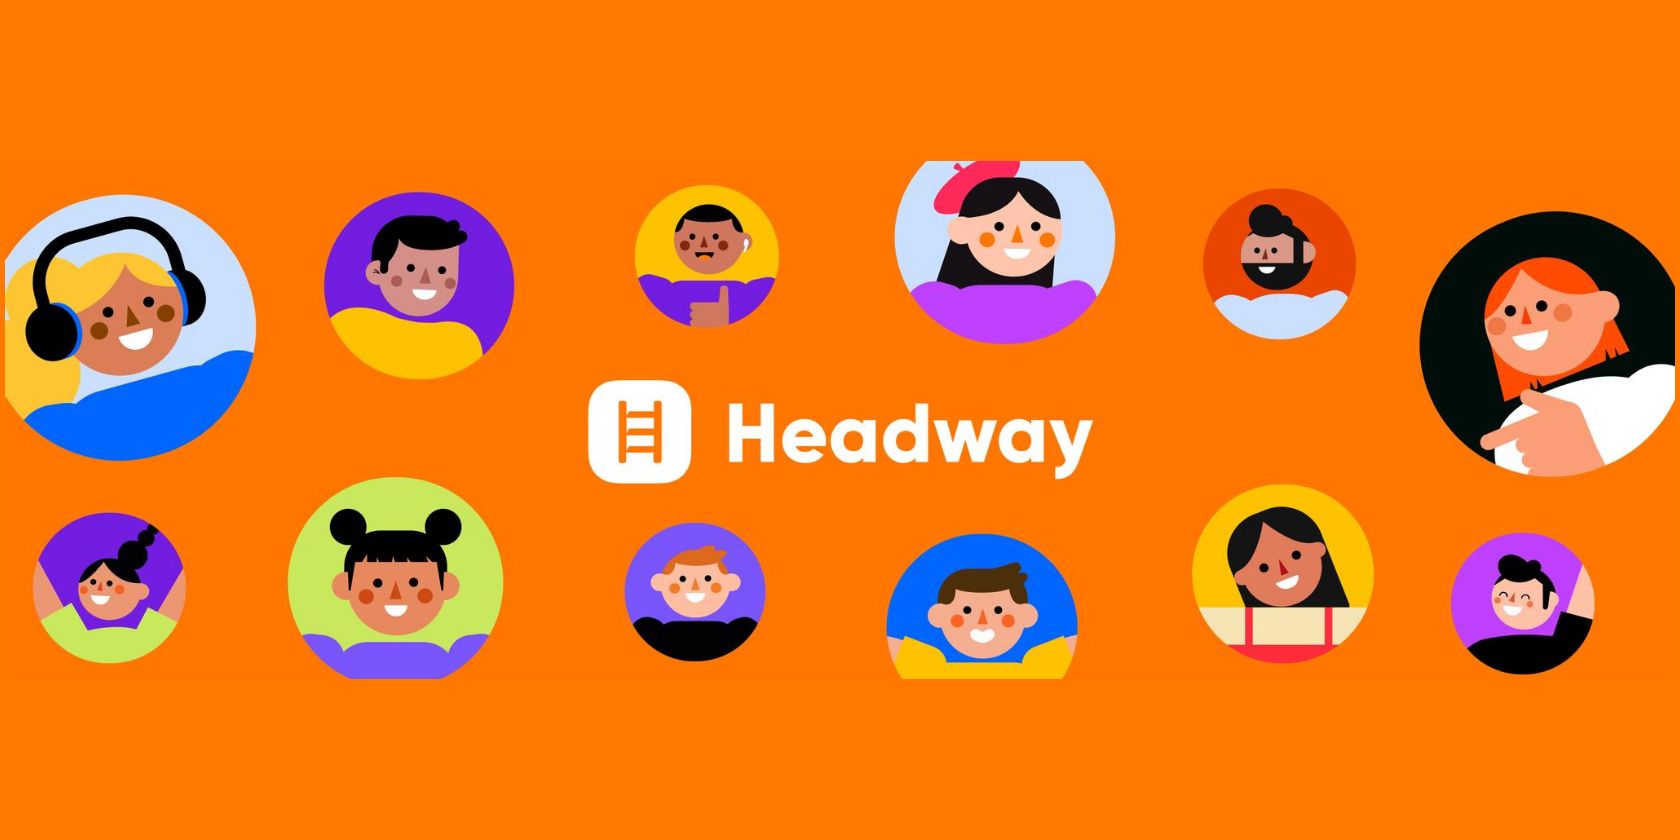 An illustration of the Headway app logo